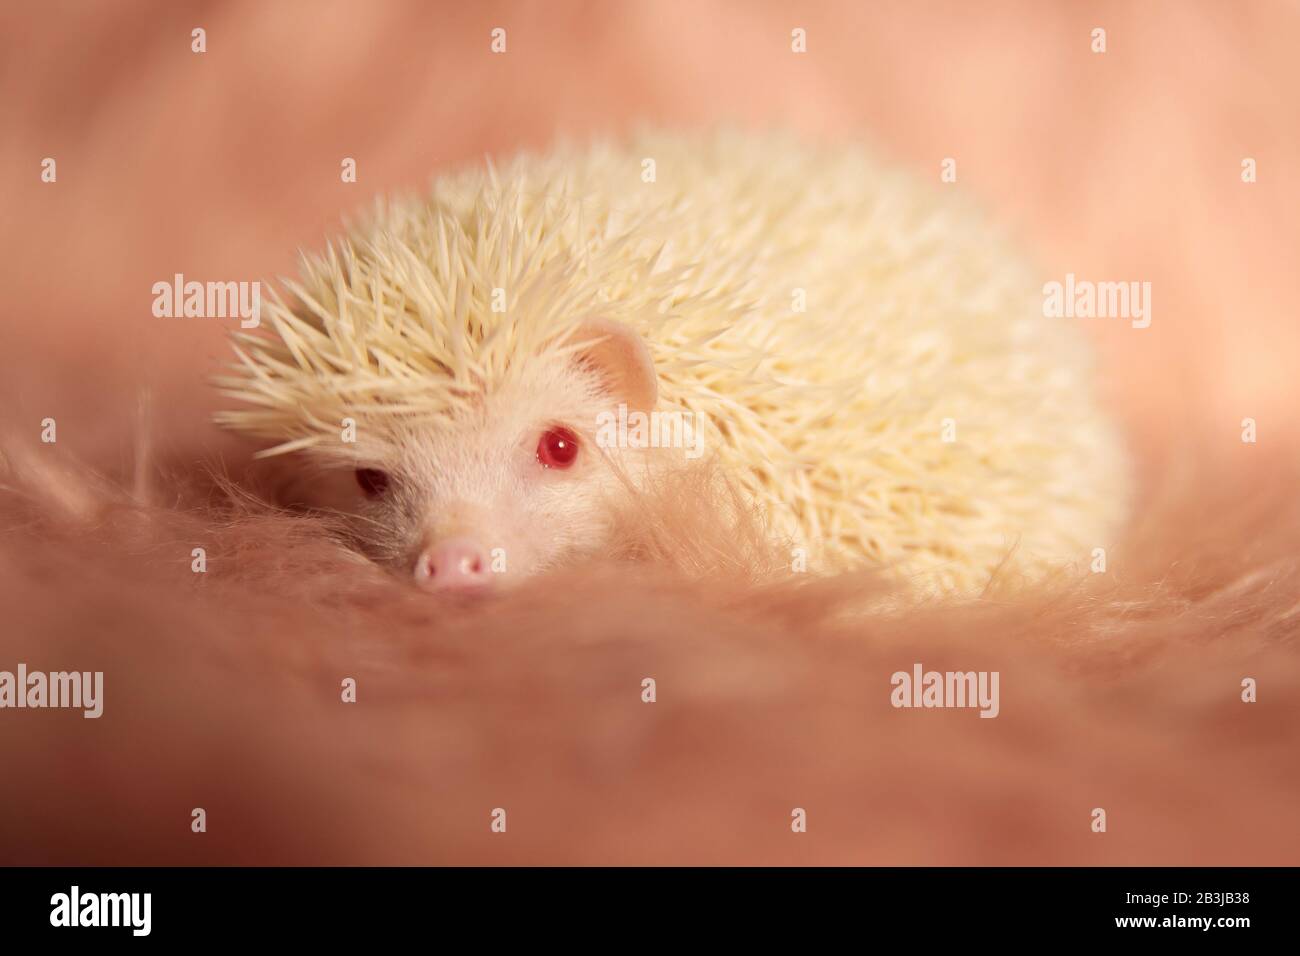 delightful tiny hedgehog laying down and resting head on the fluffy fur underneath it on pink soft studio background Stock Photo